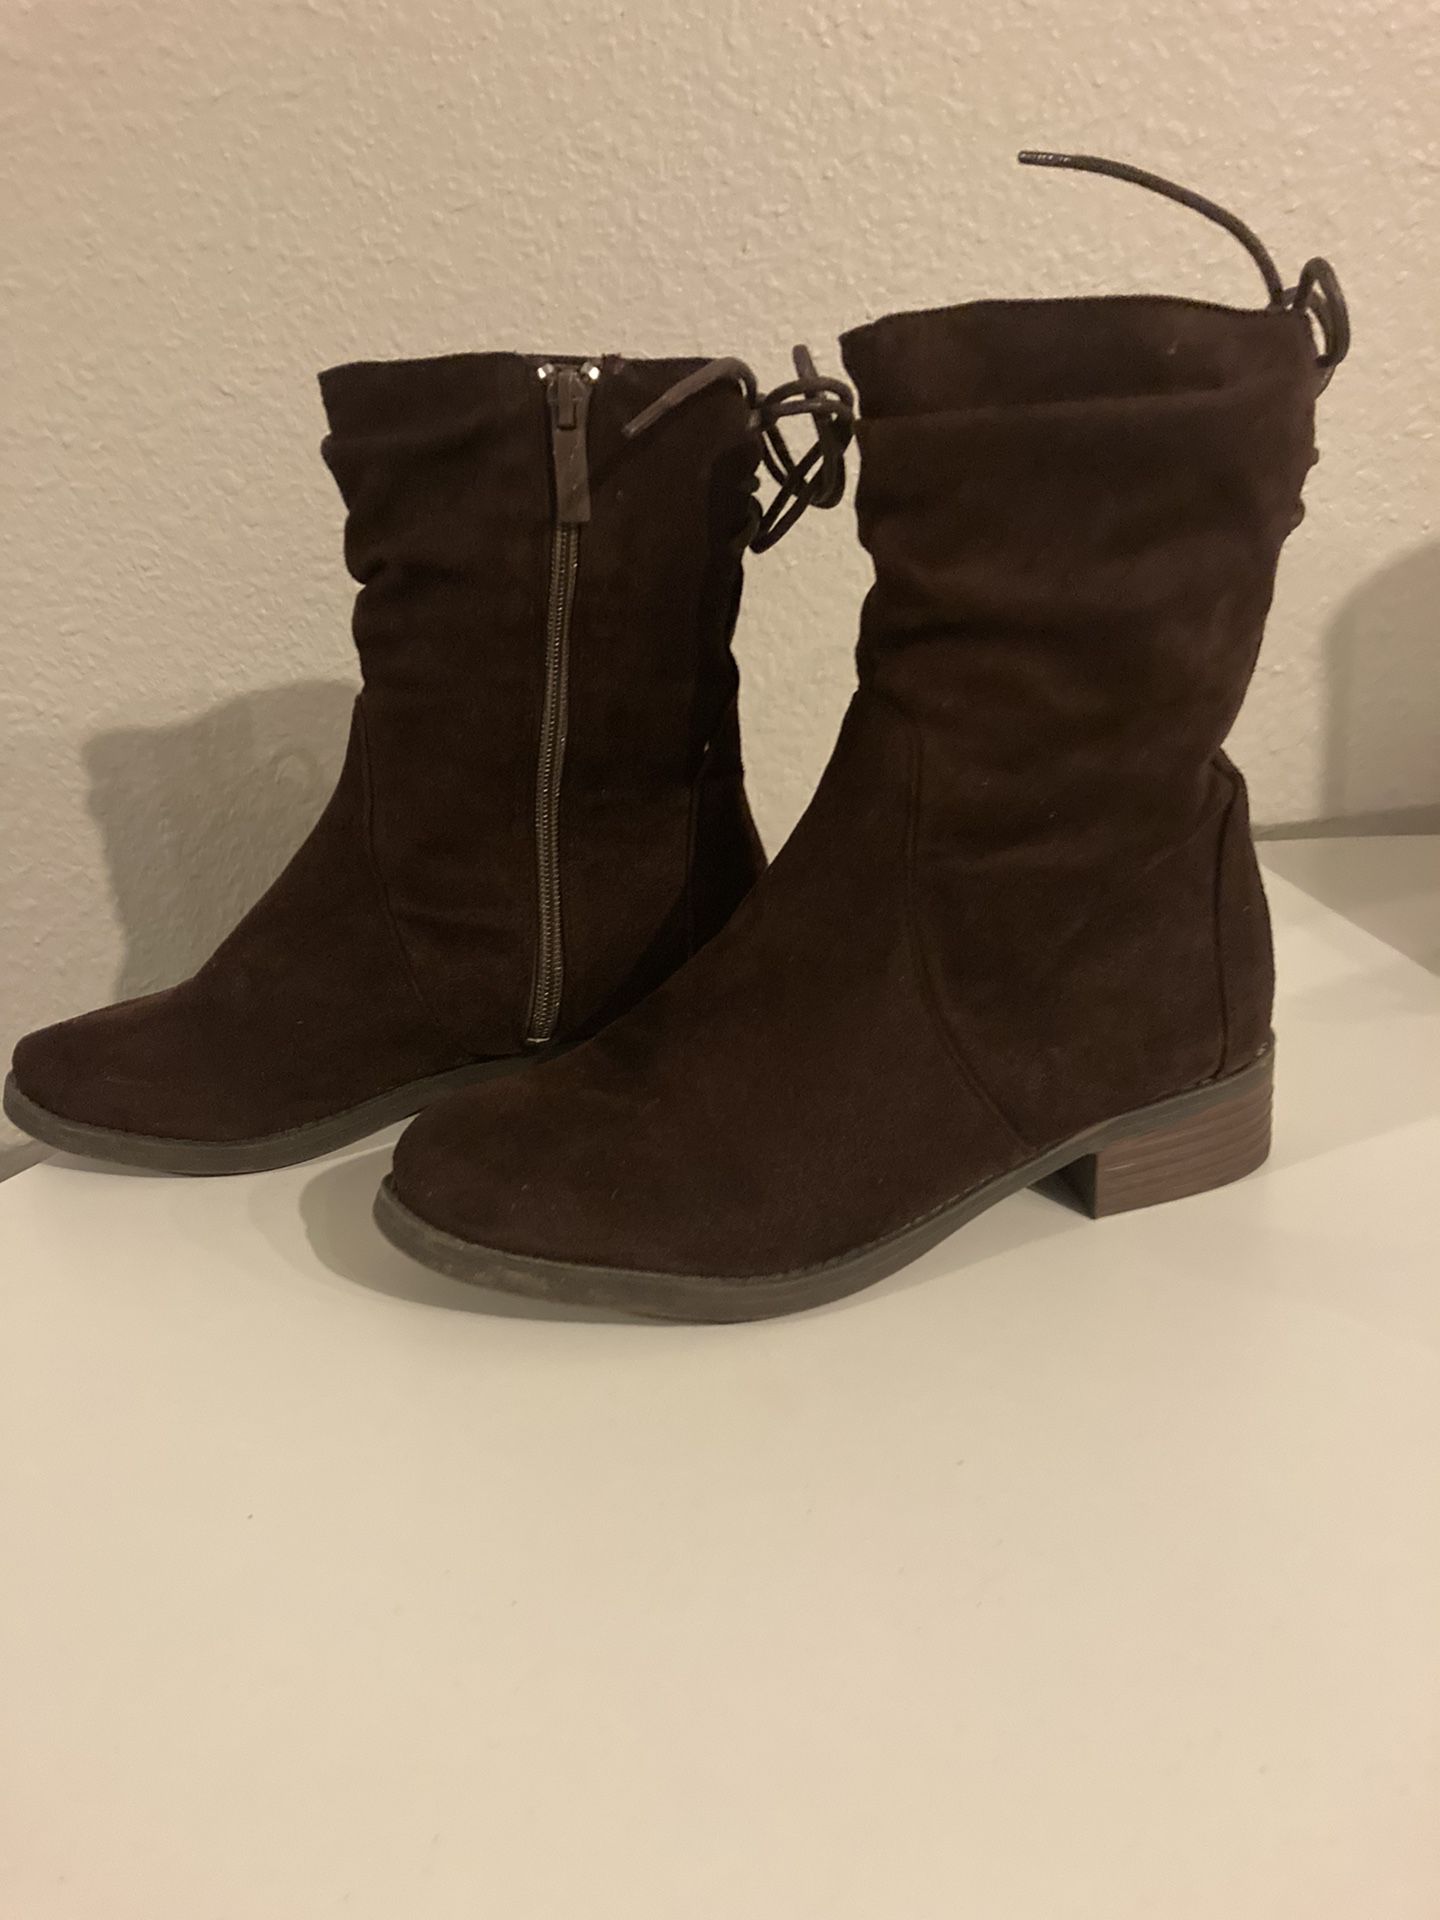  women boots   size  61/2   Brown color 